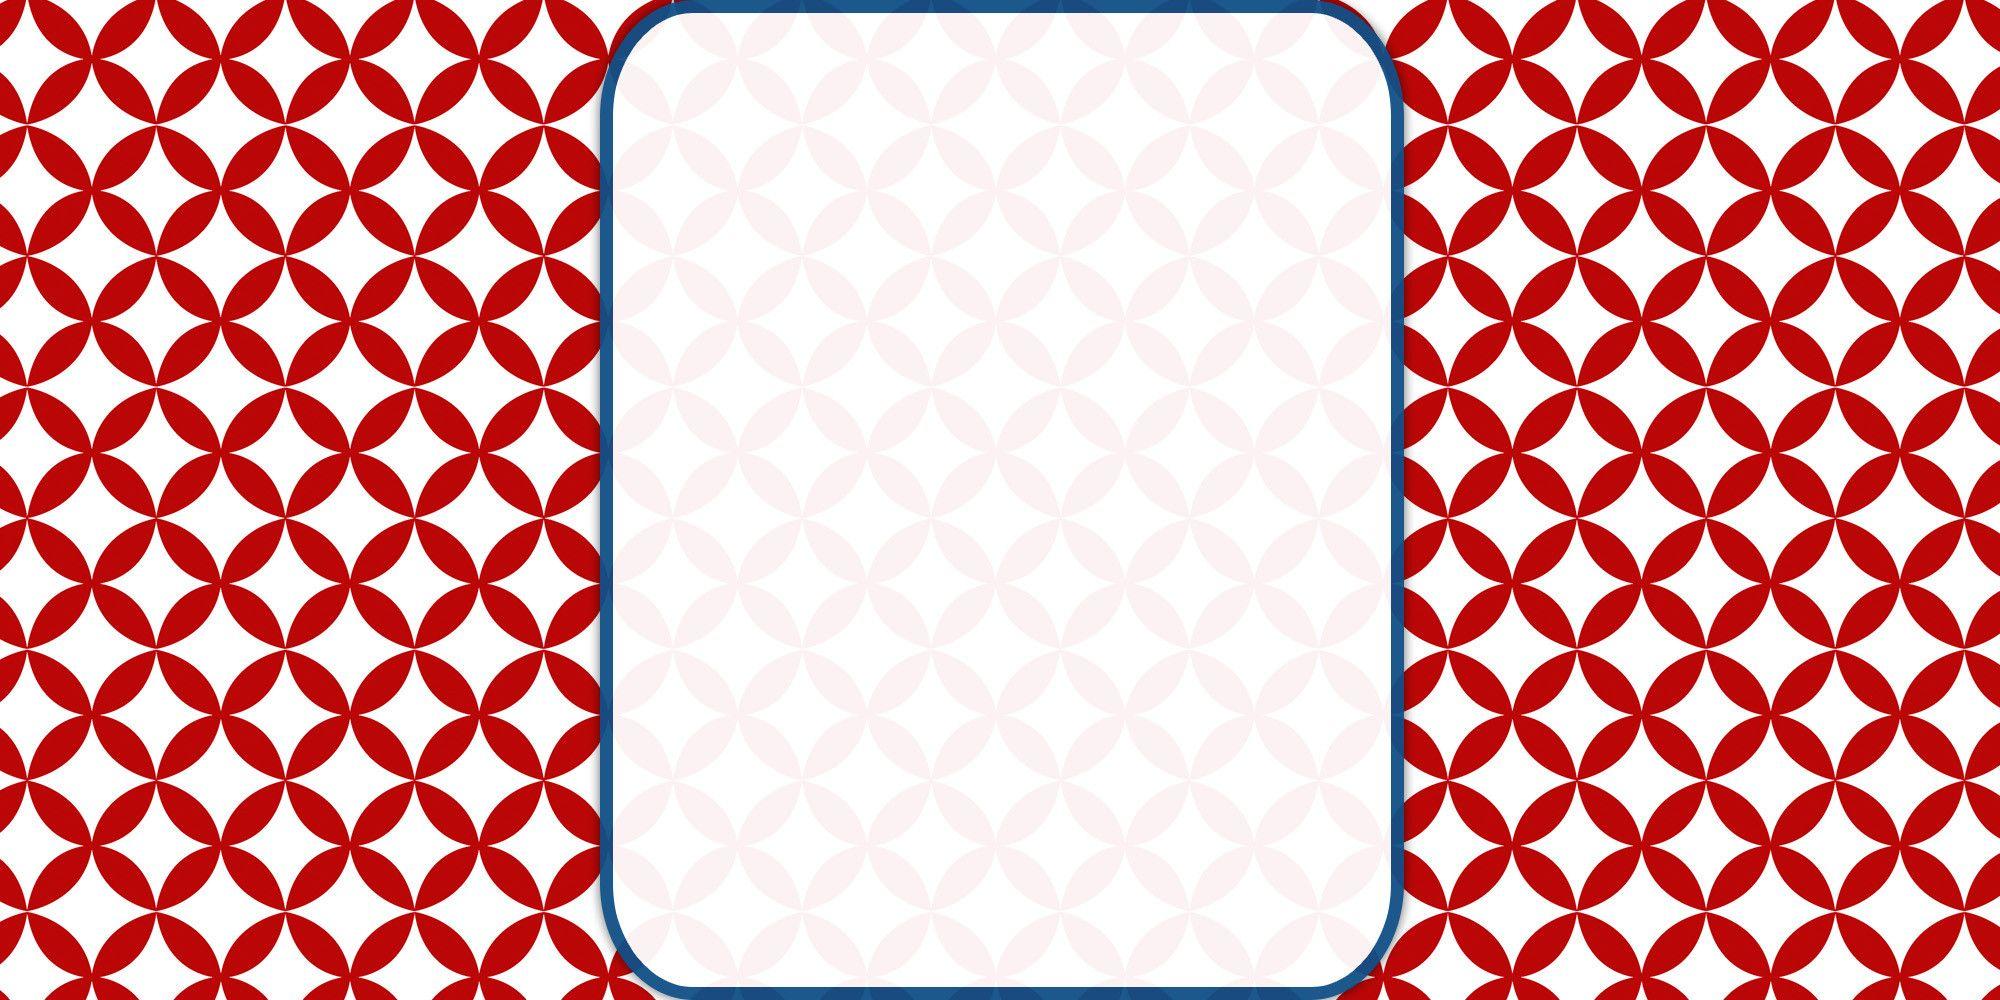 Patriotic Background. Fourth of July Wallpaper. The Cutest Blog